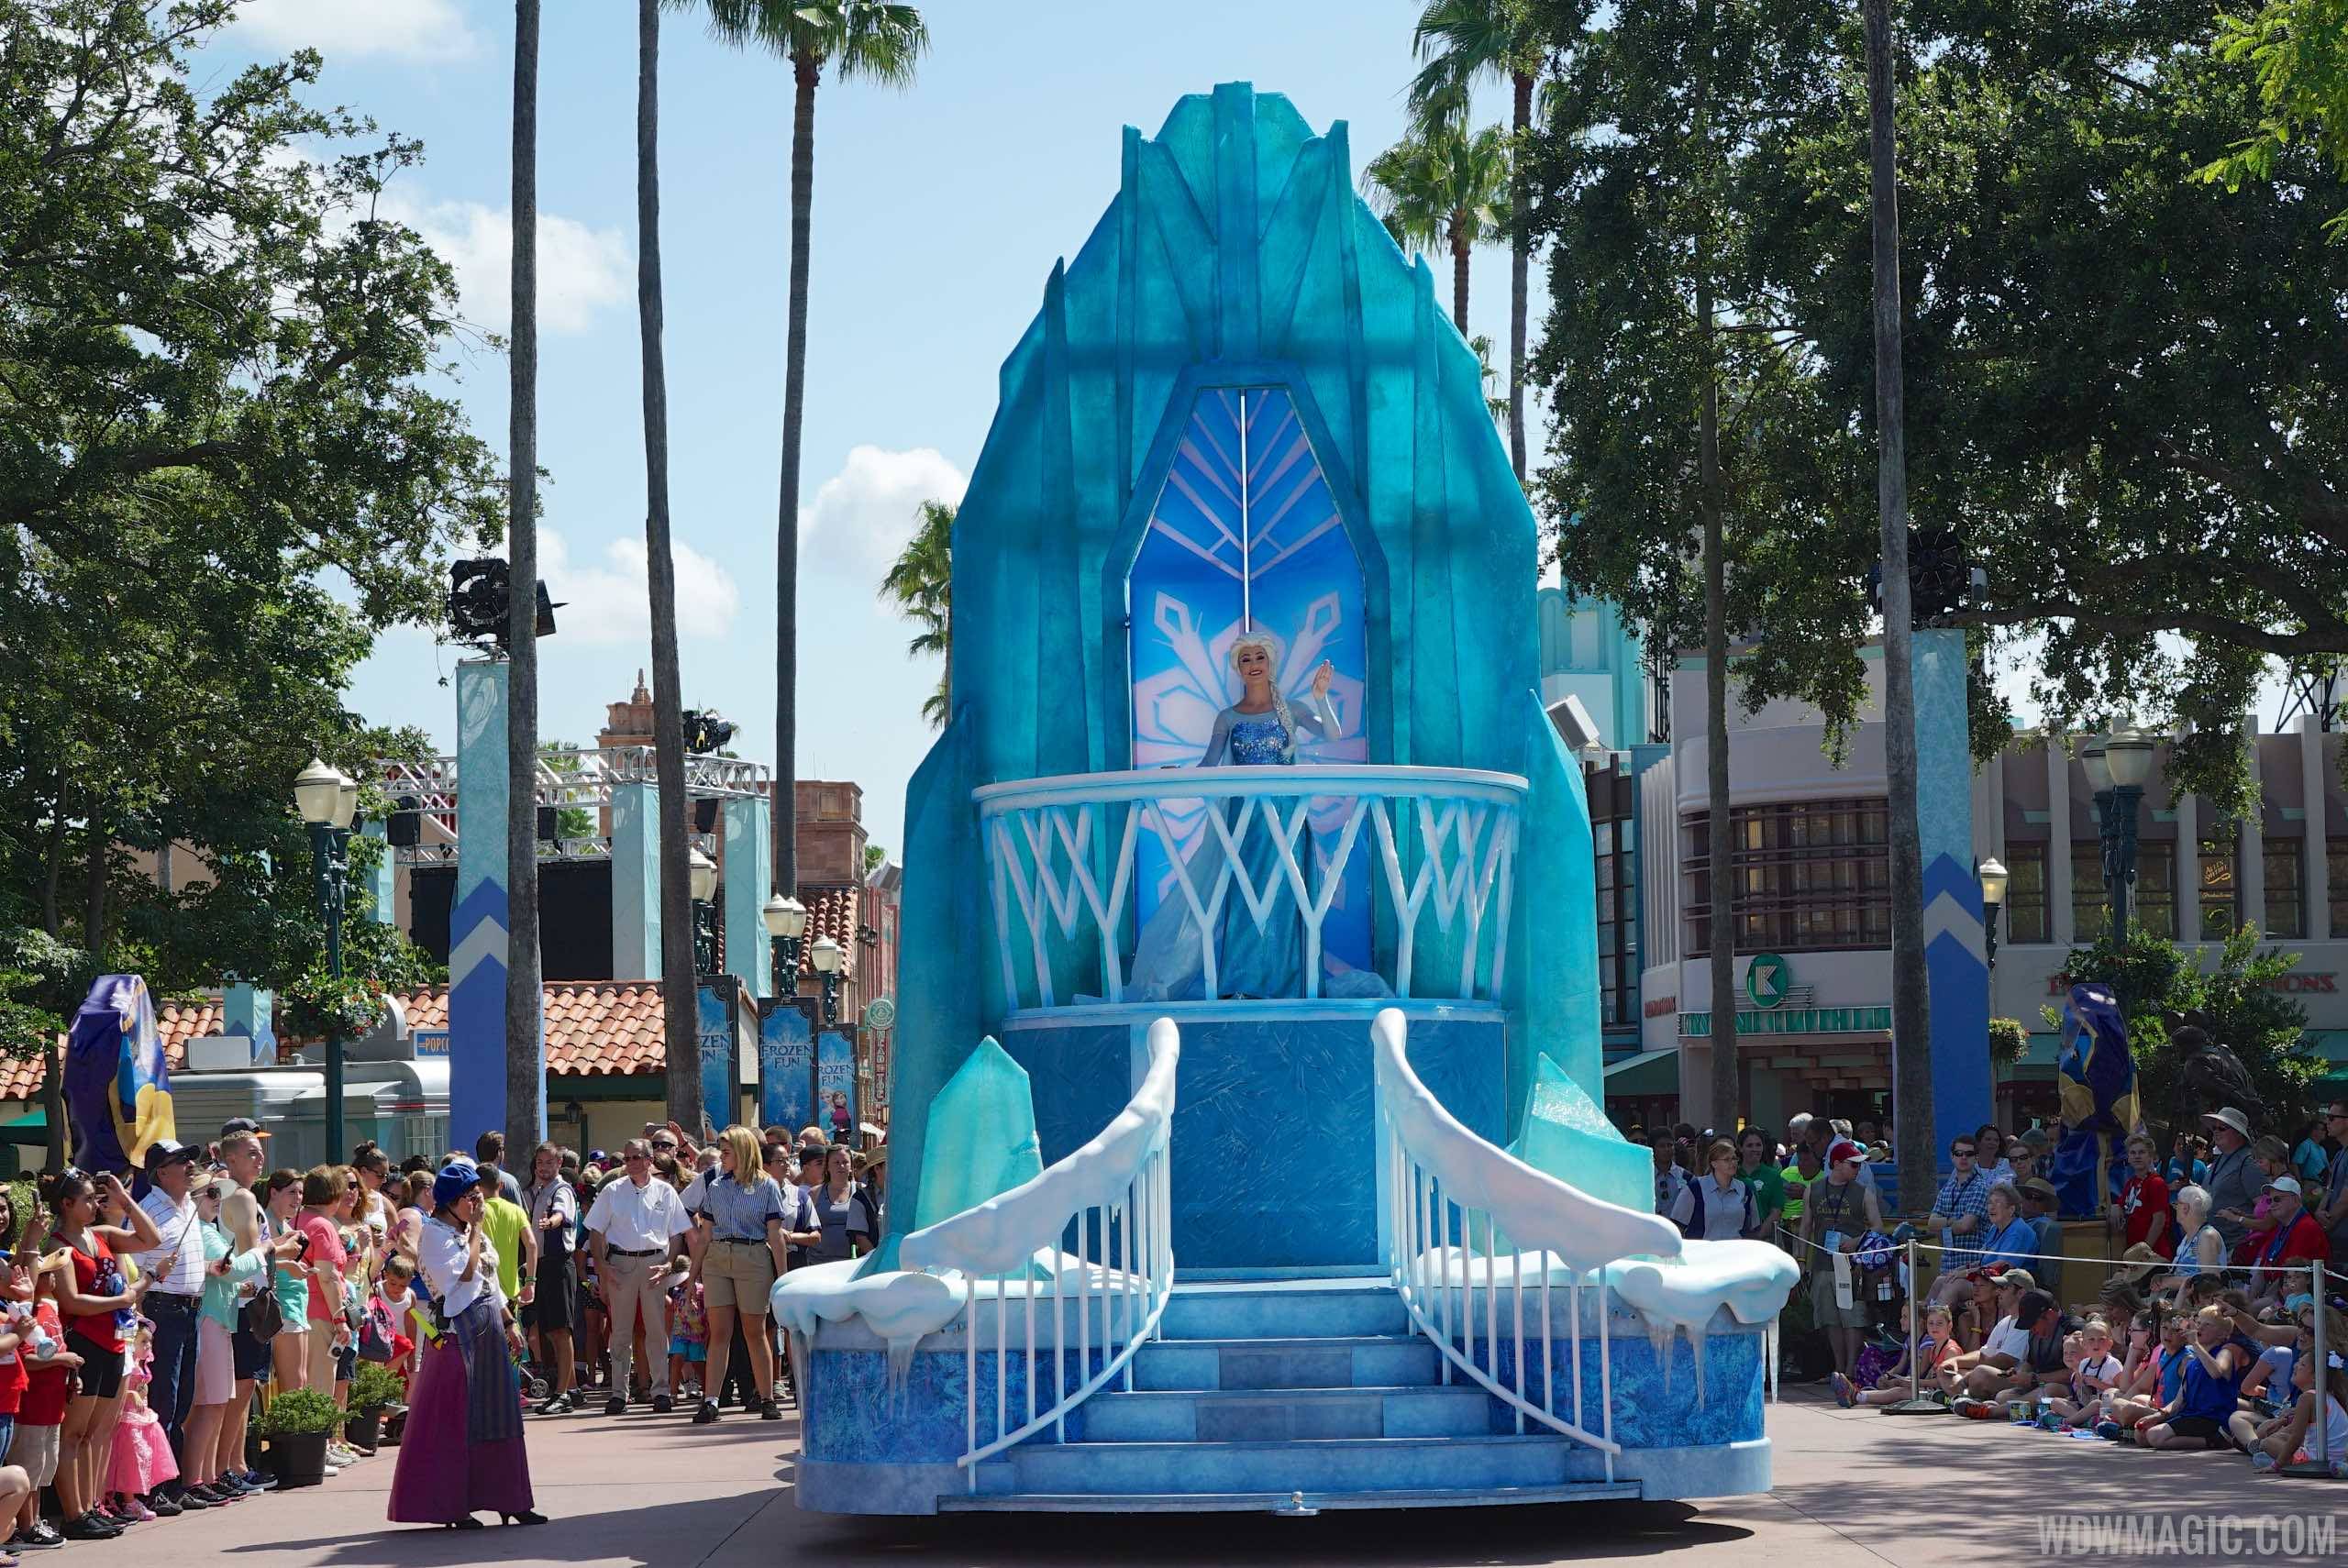 'Frozen Summer Fun' premium package now fully sold out for all remaining dates